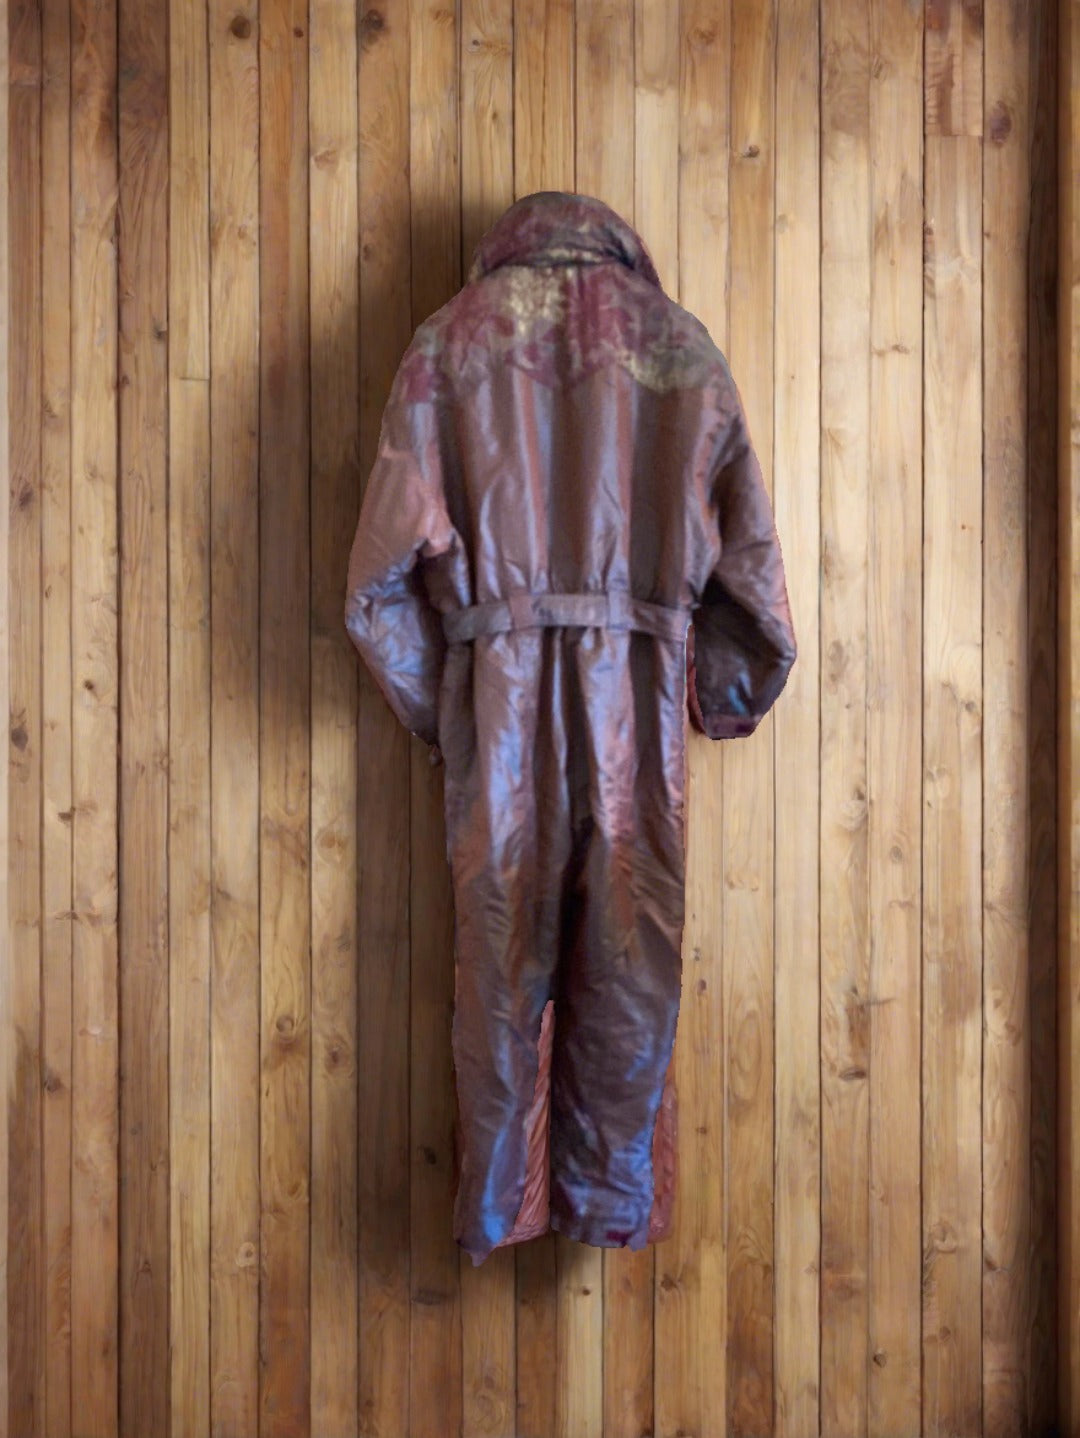 Vintage Tresspass shimmery Brown, Maroon & Gold One Piece Ski Suit. Rear view. Against a wood wall